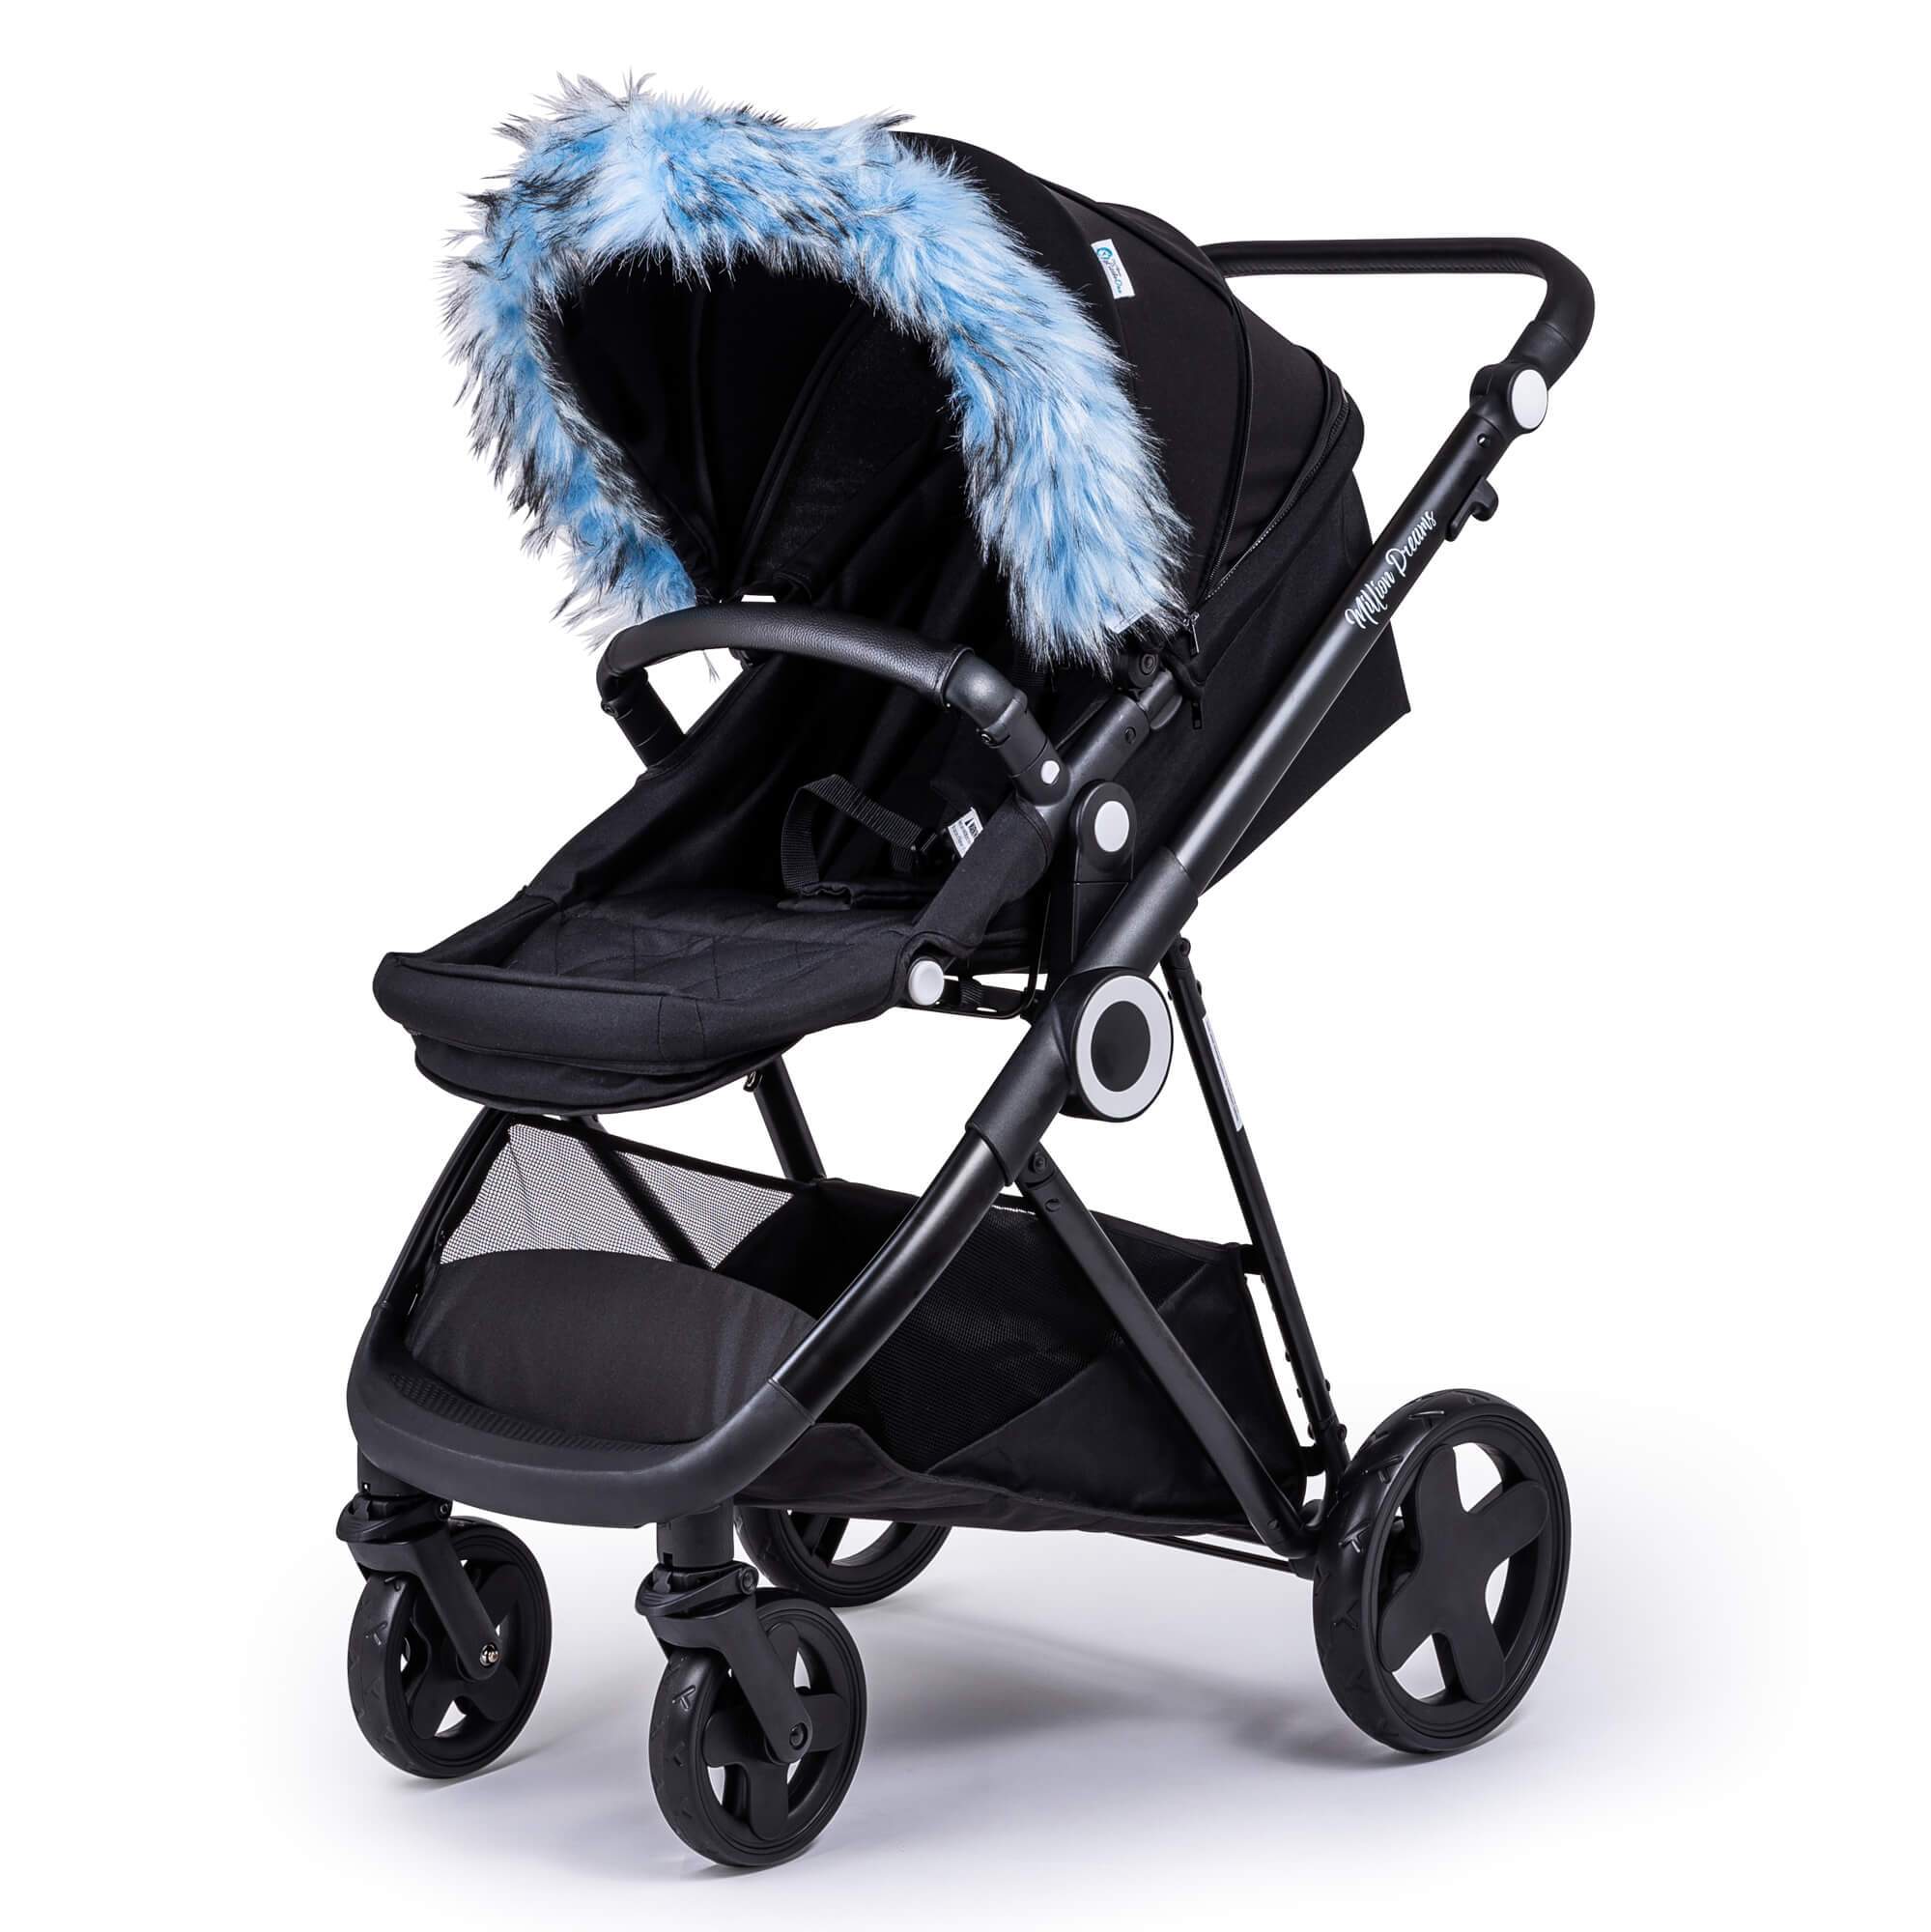 Pram Fur Hood Trim Attachment for Pushchair Compatible with Zeta - Light Blue / Fits All Models | For Your Little One